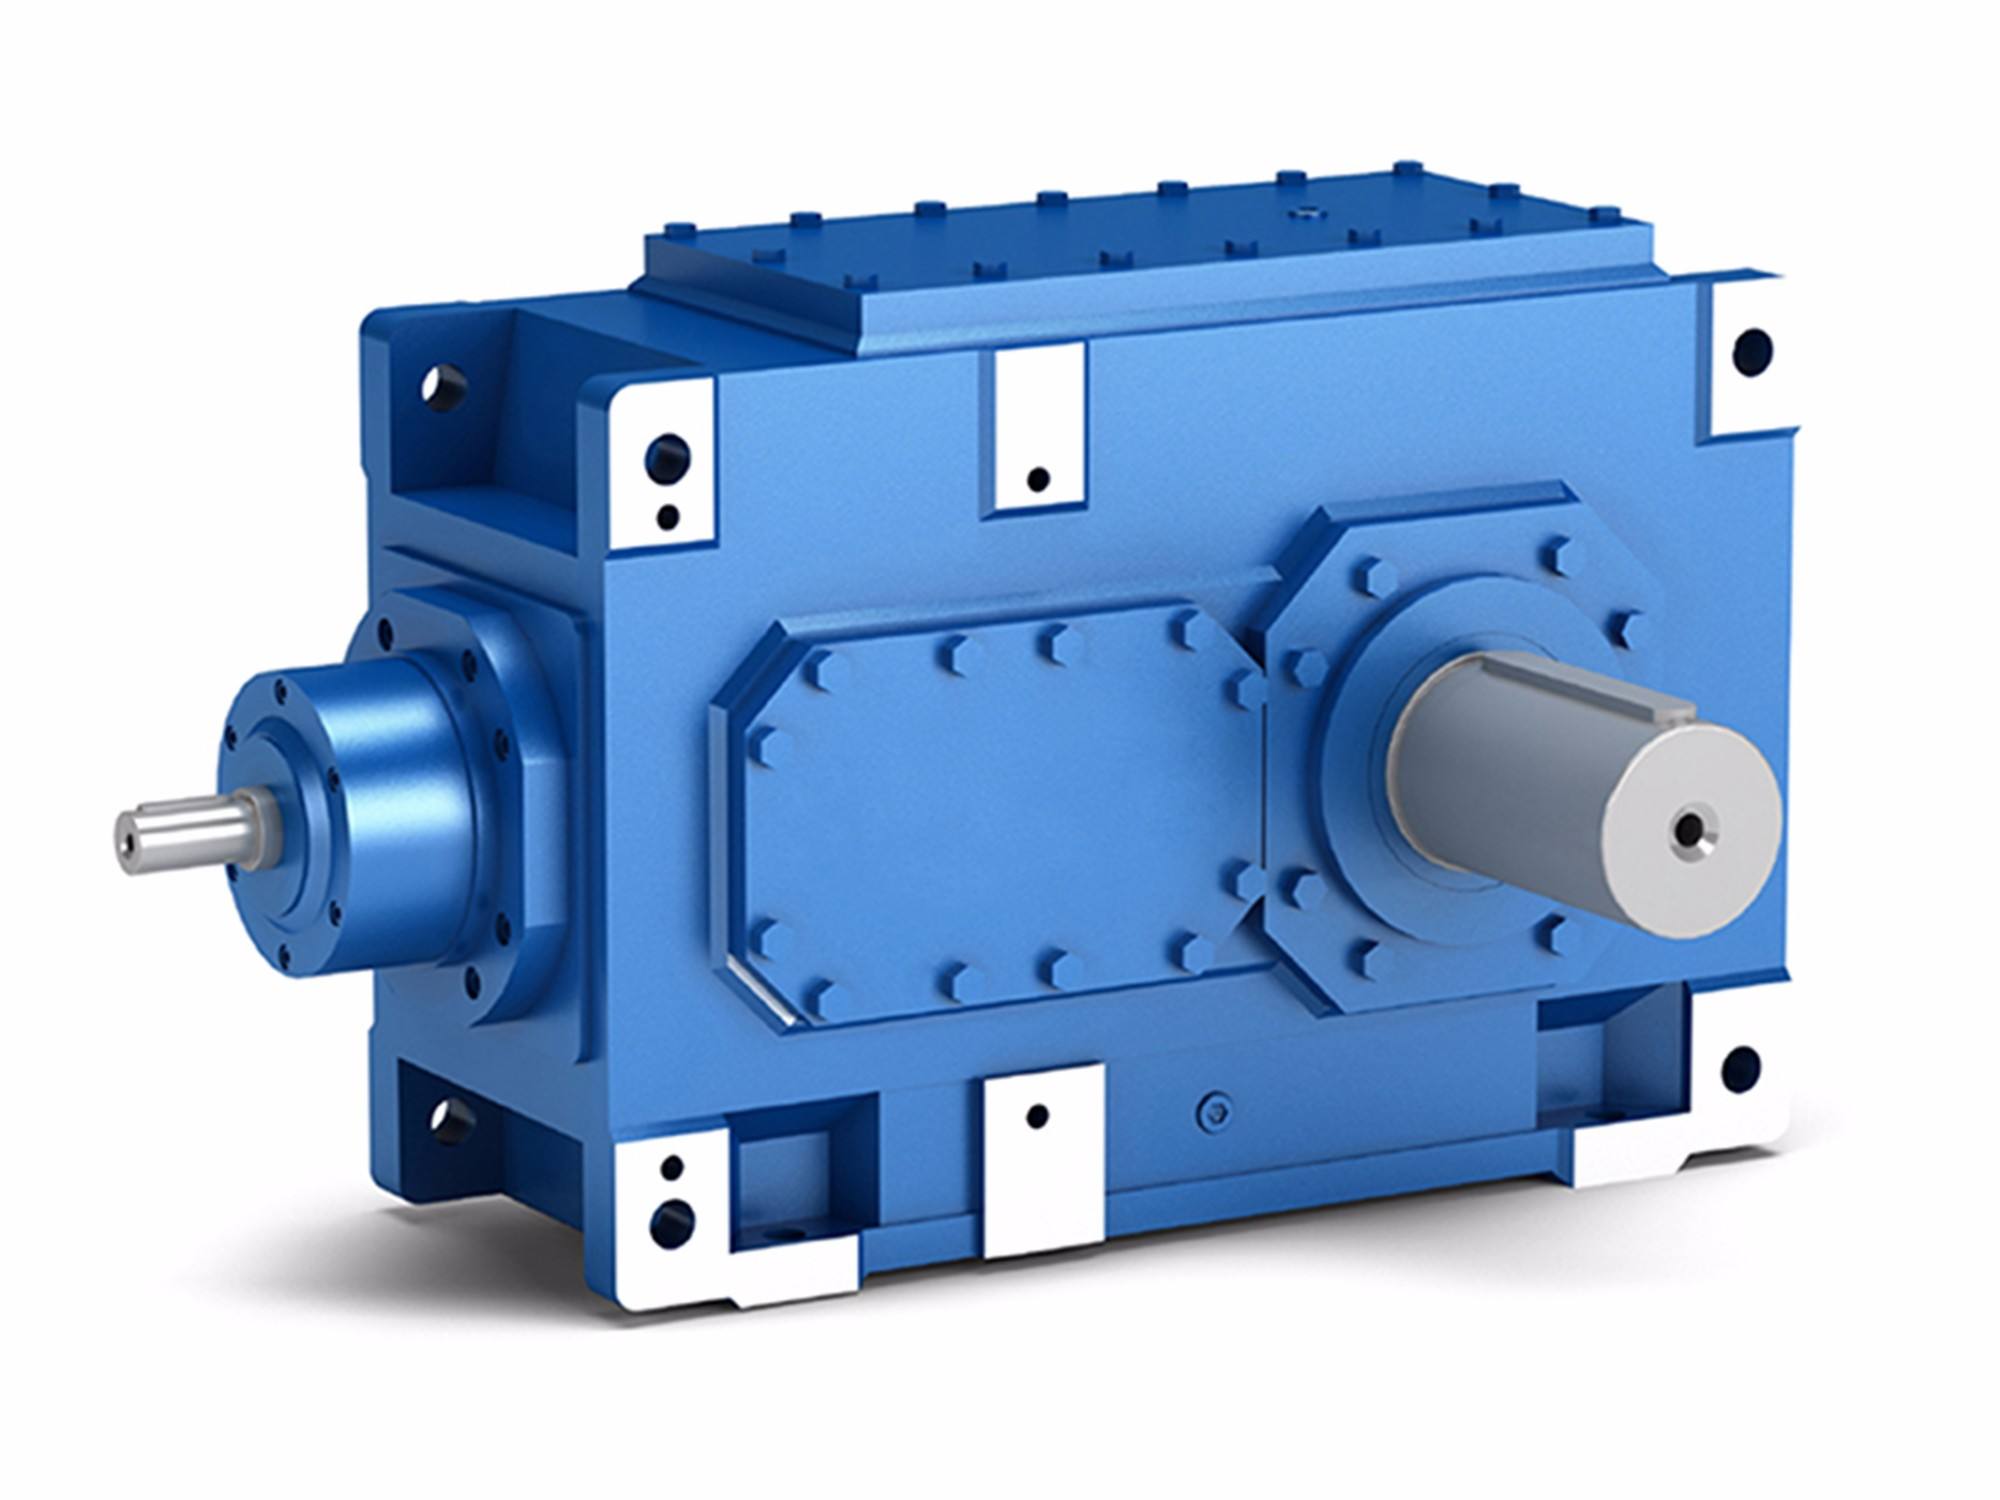 Our quotation and drawing attached for ZSY160 gearbox